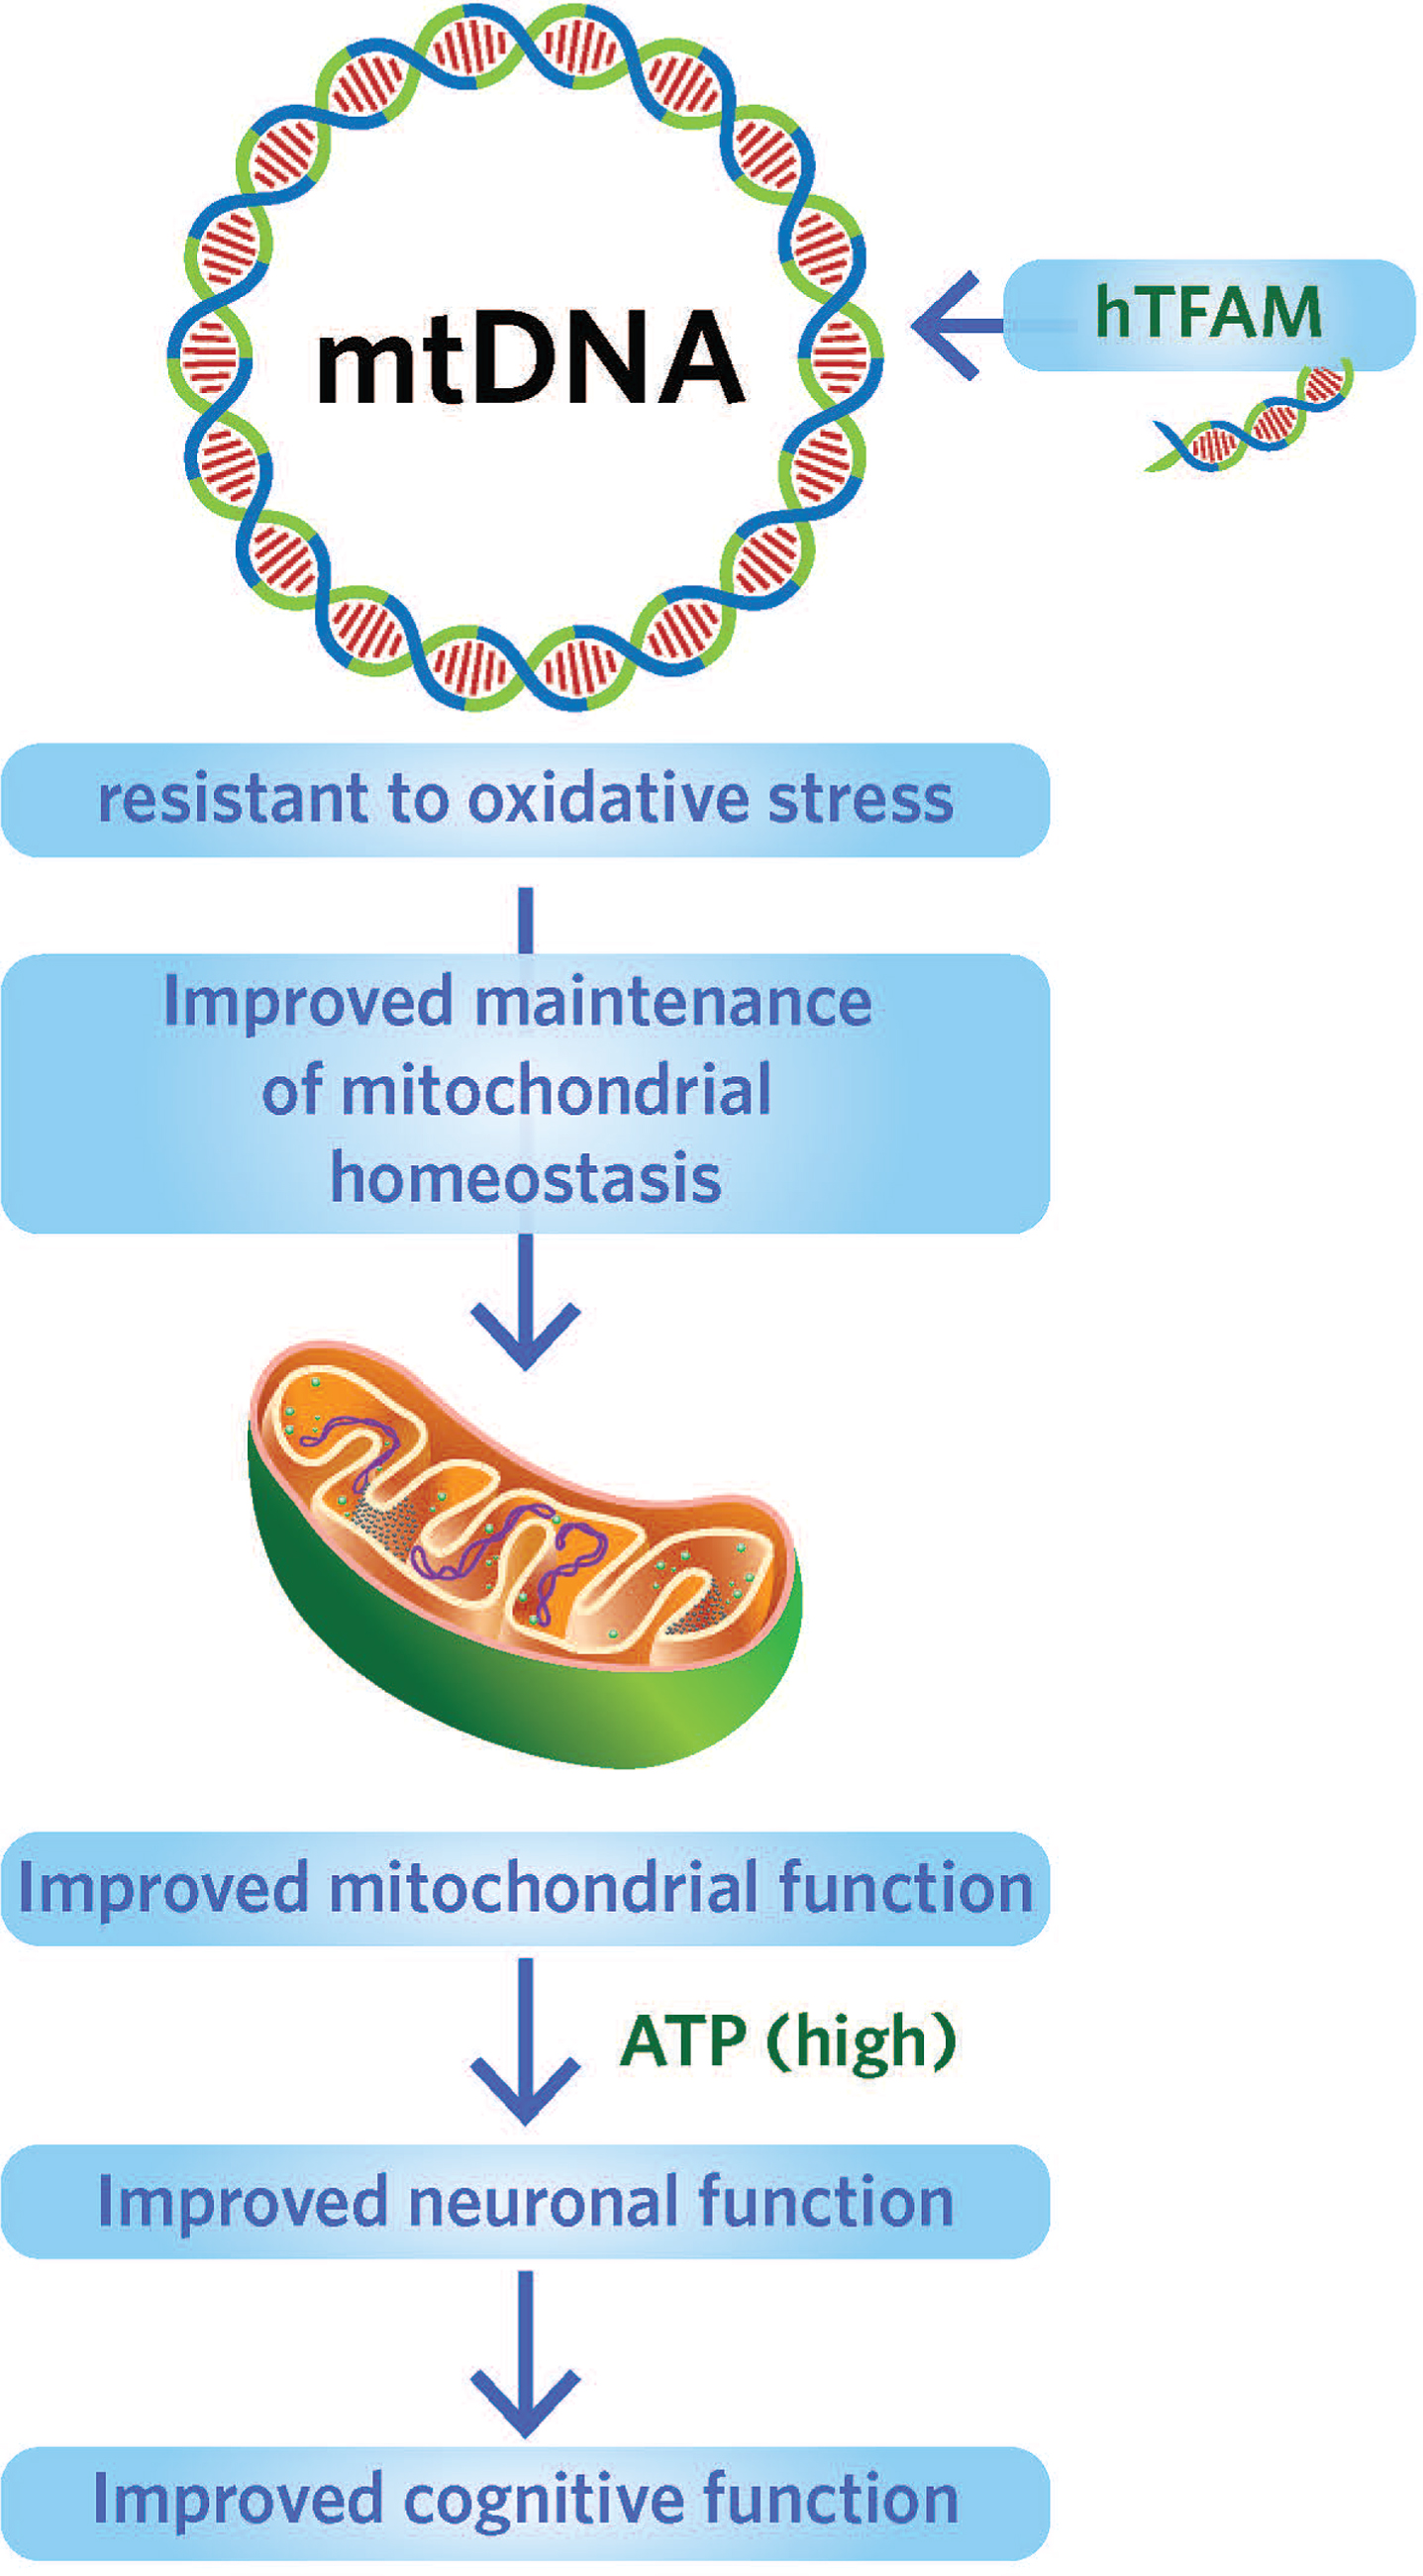 Targeting human mitochondrial transcription factor to protect mtDNA from oxidative stress. Source: Foundation for Mitochondrial Medicine.